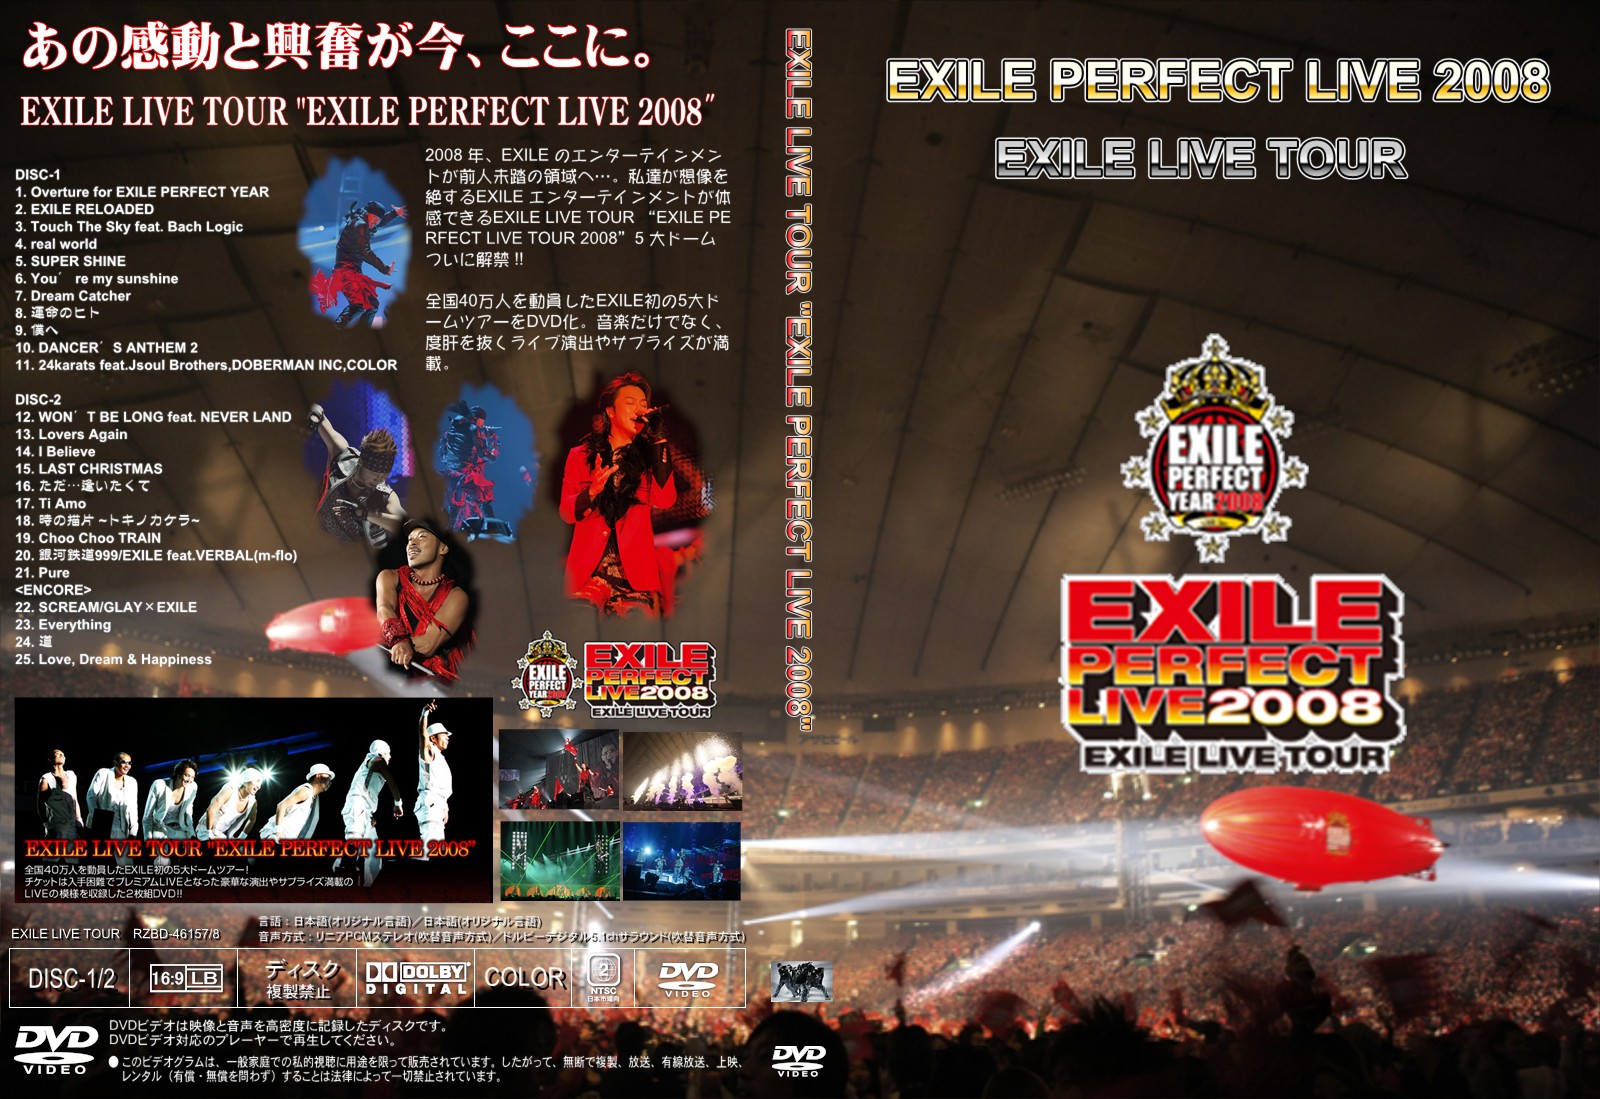 Exile Live Tour Exile Perfect Live 08 ジャケット 自己れ べる